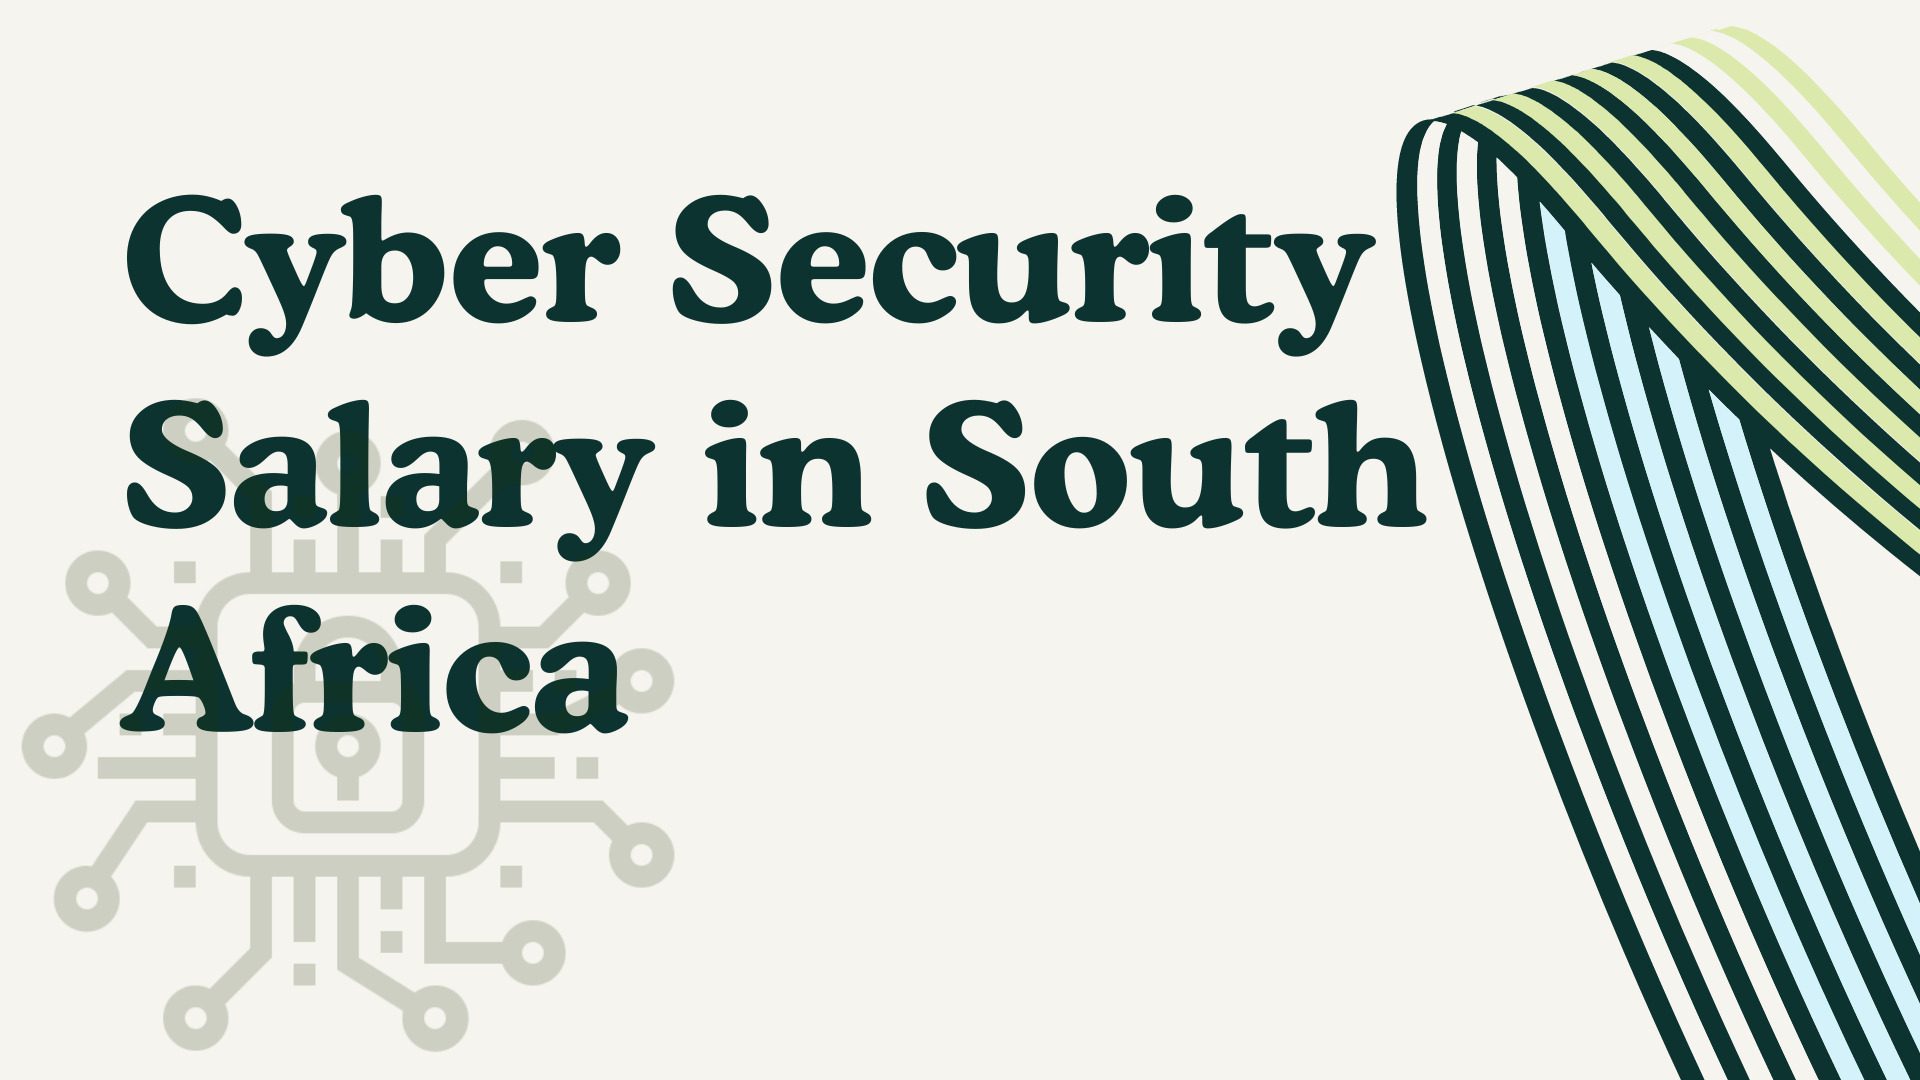 Cyber Security Salary in South Africa